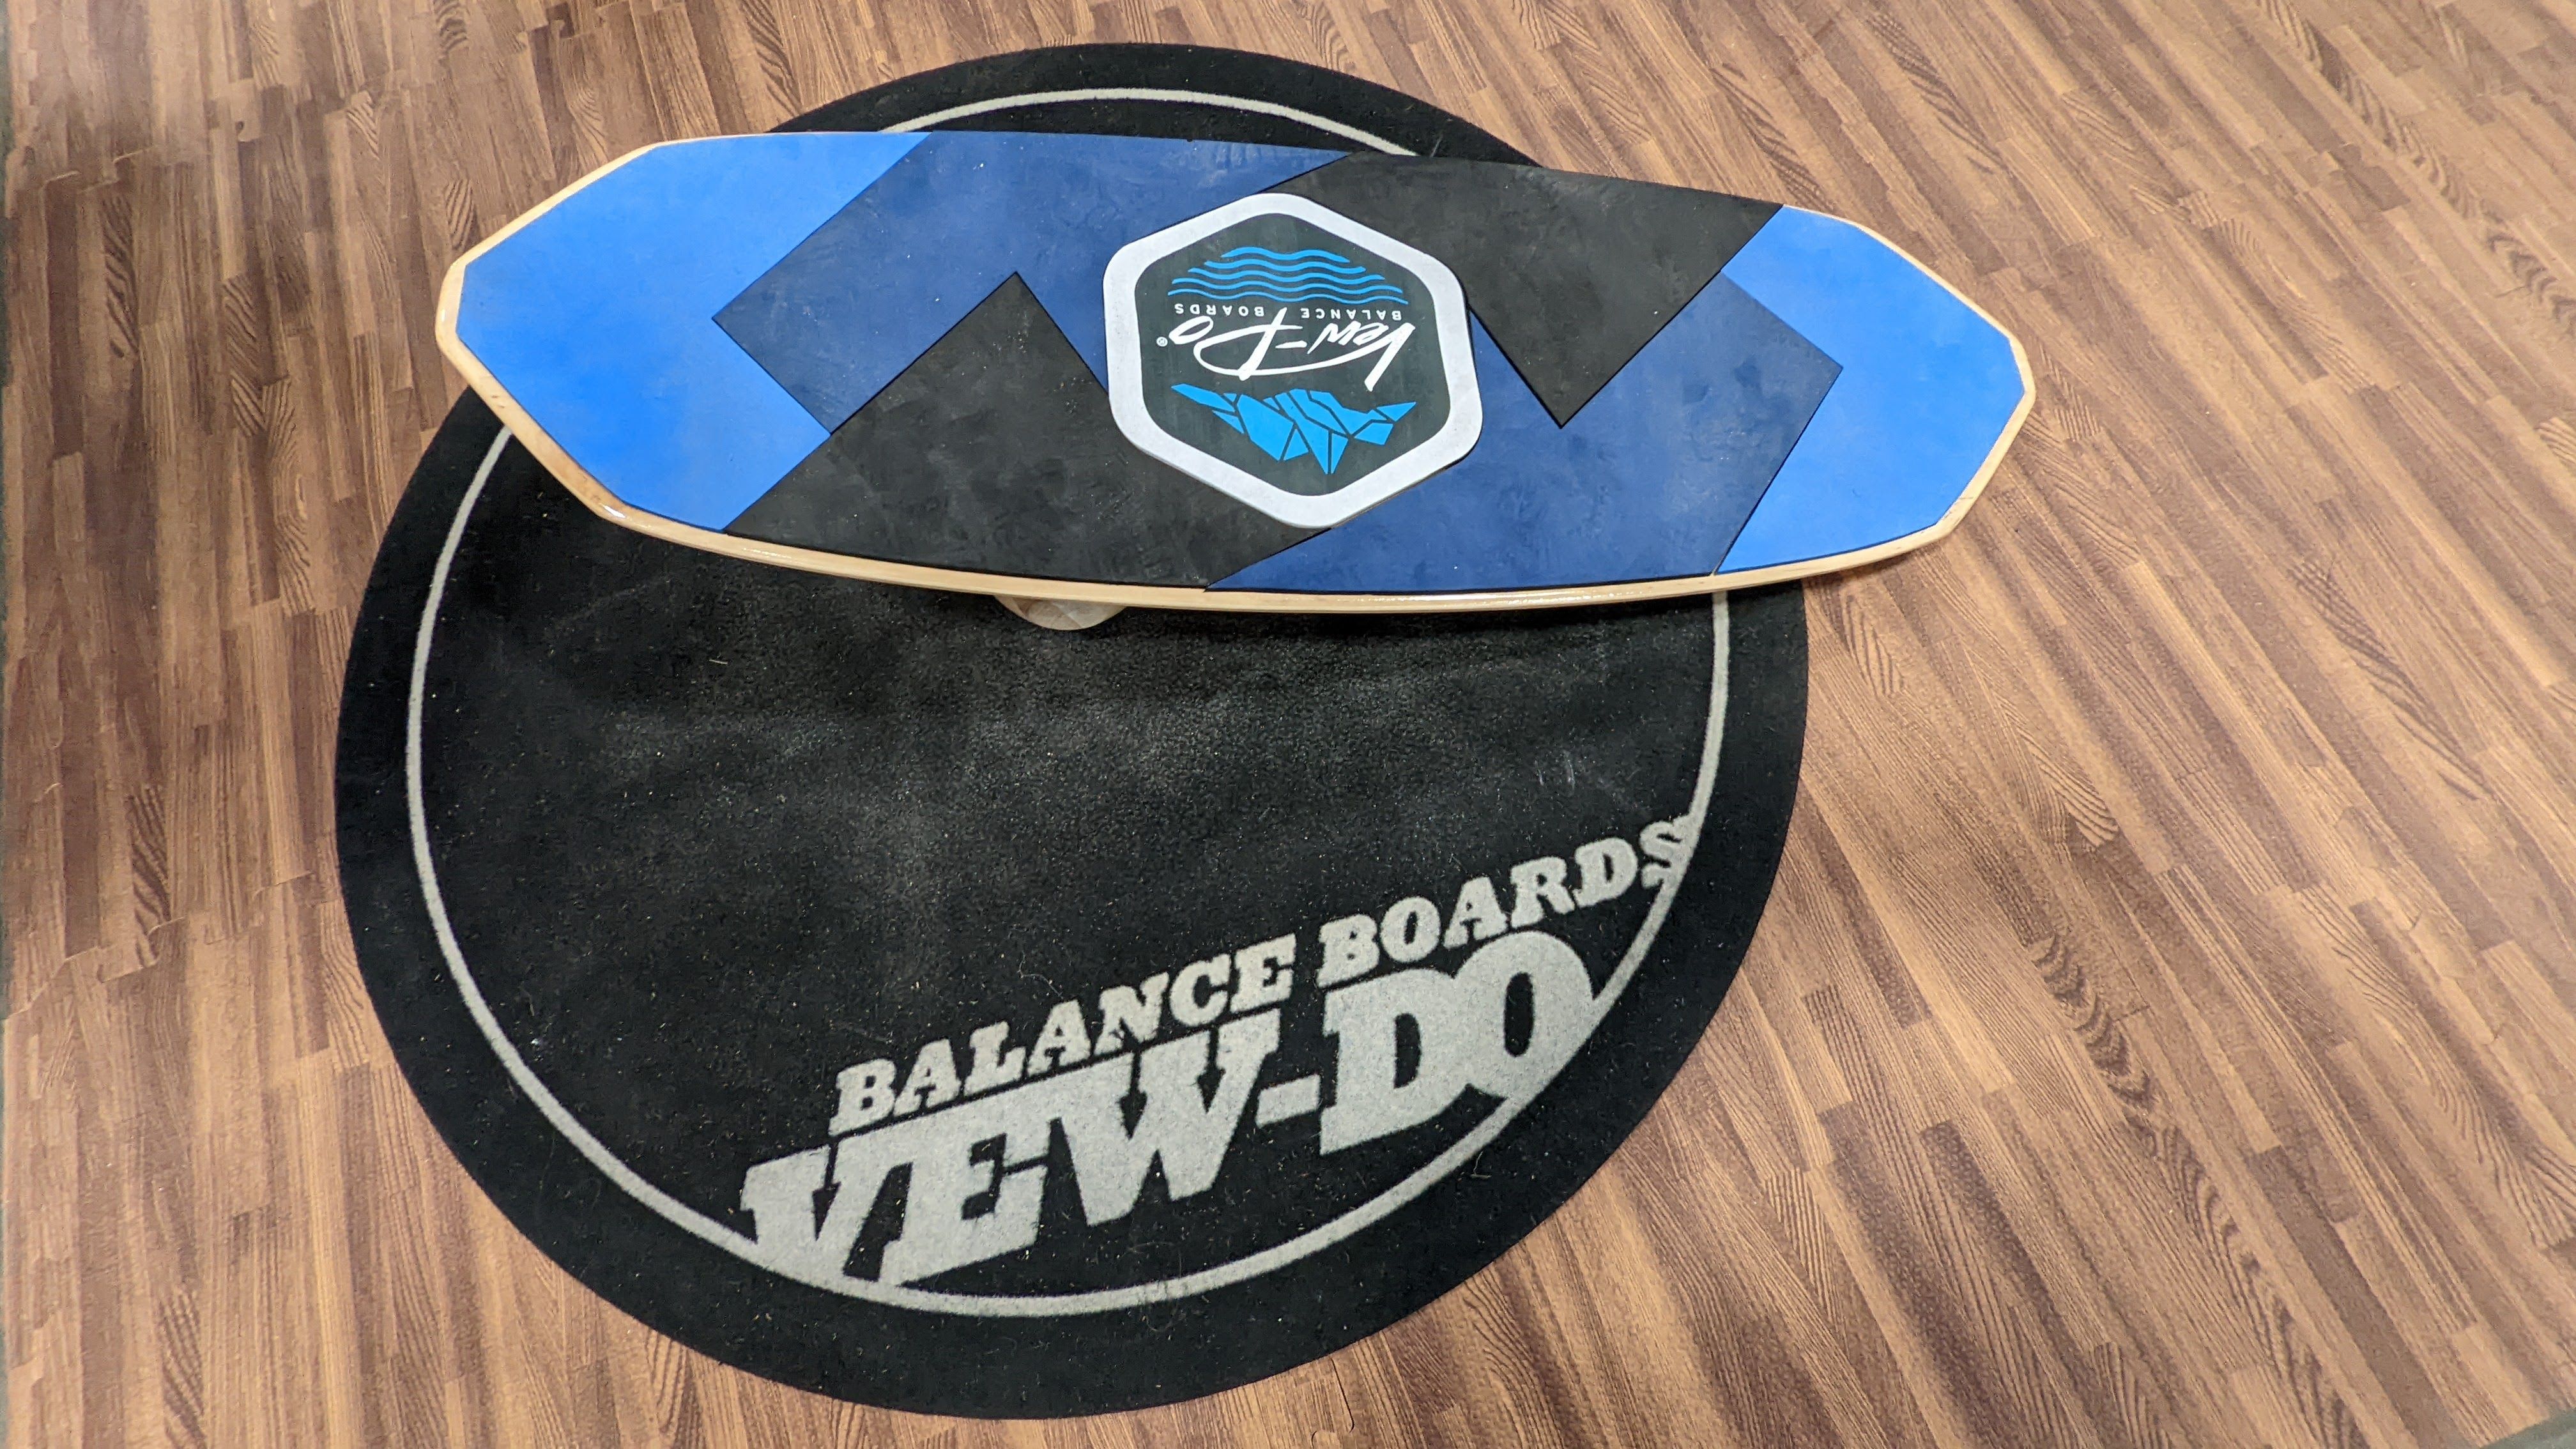 A blue board rests on a practice mat that says "Balance Boards Vew-Do"